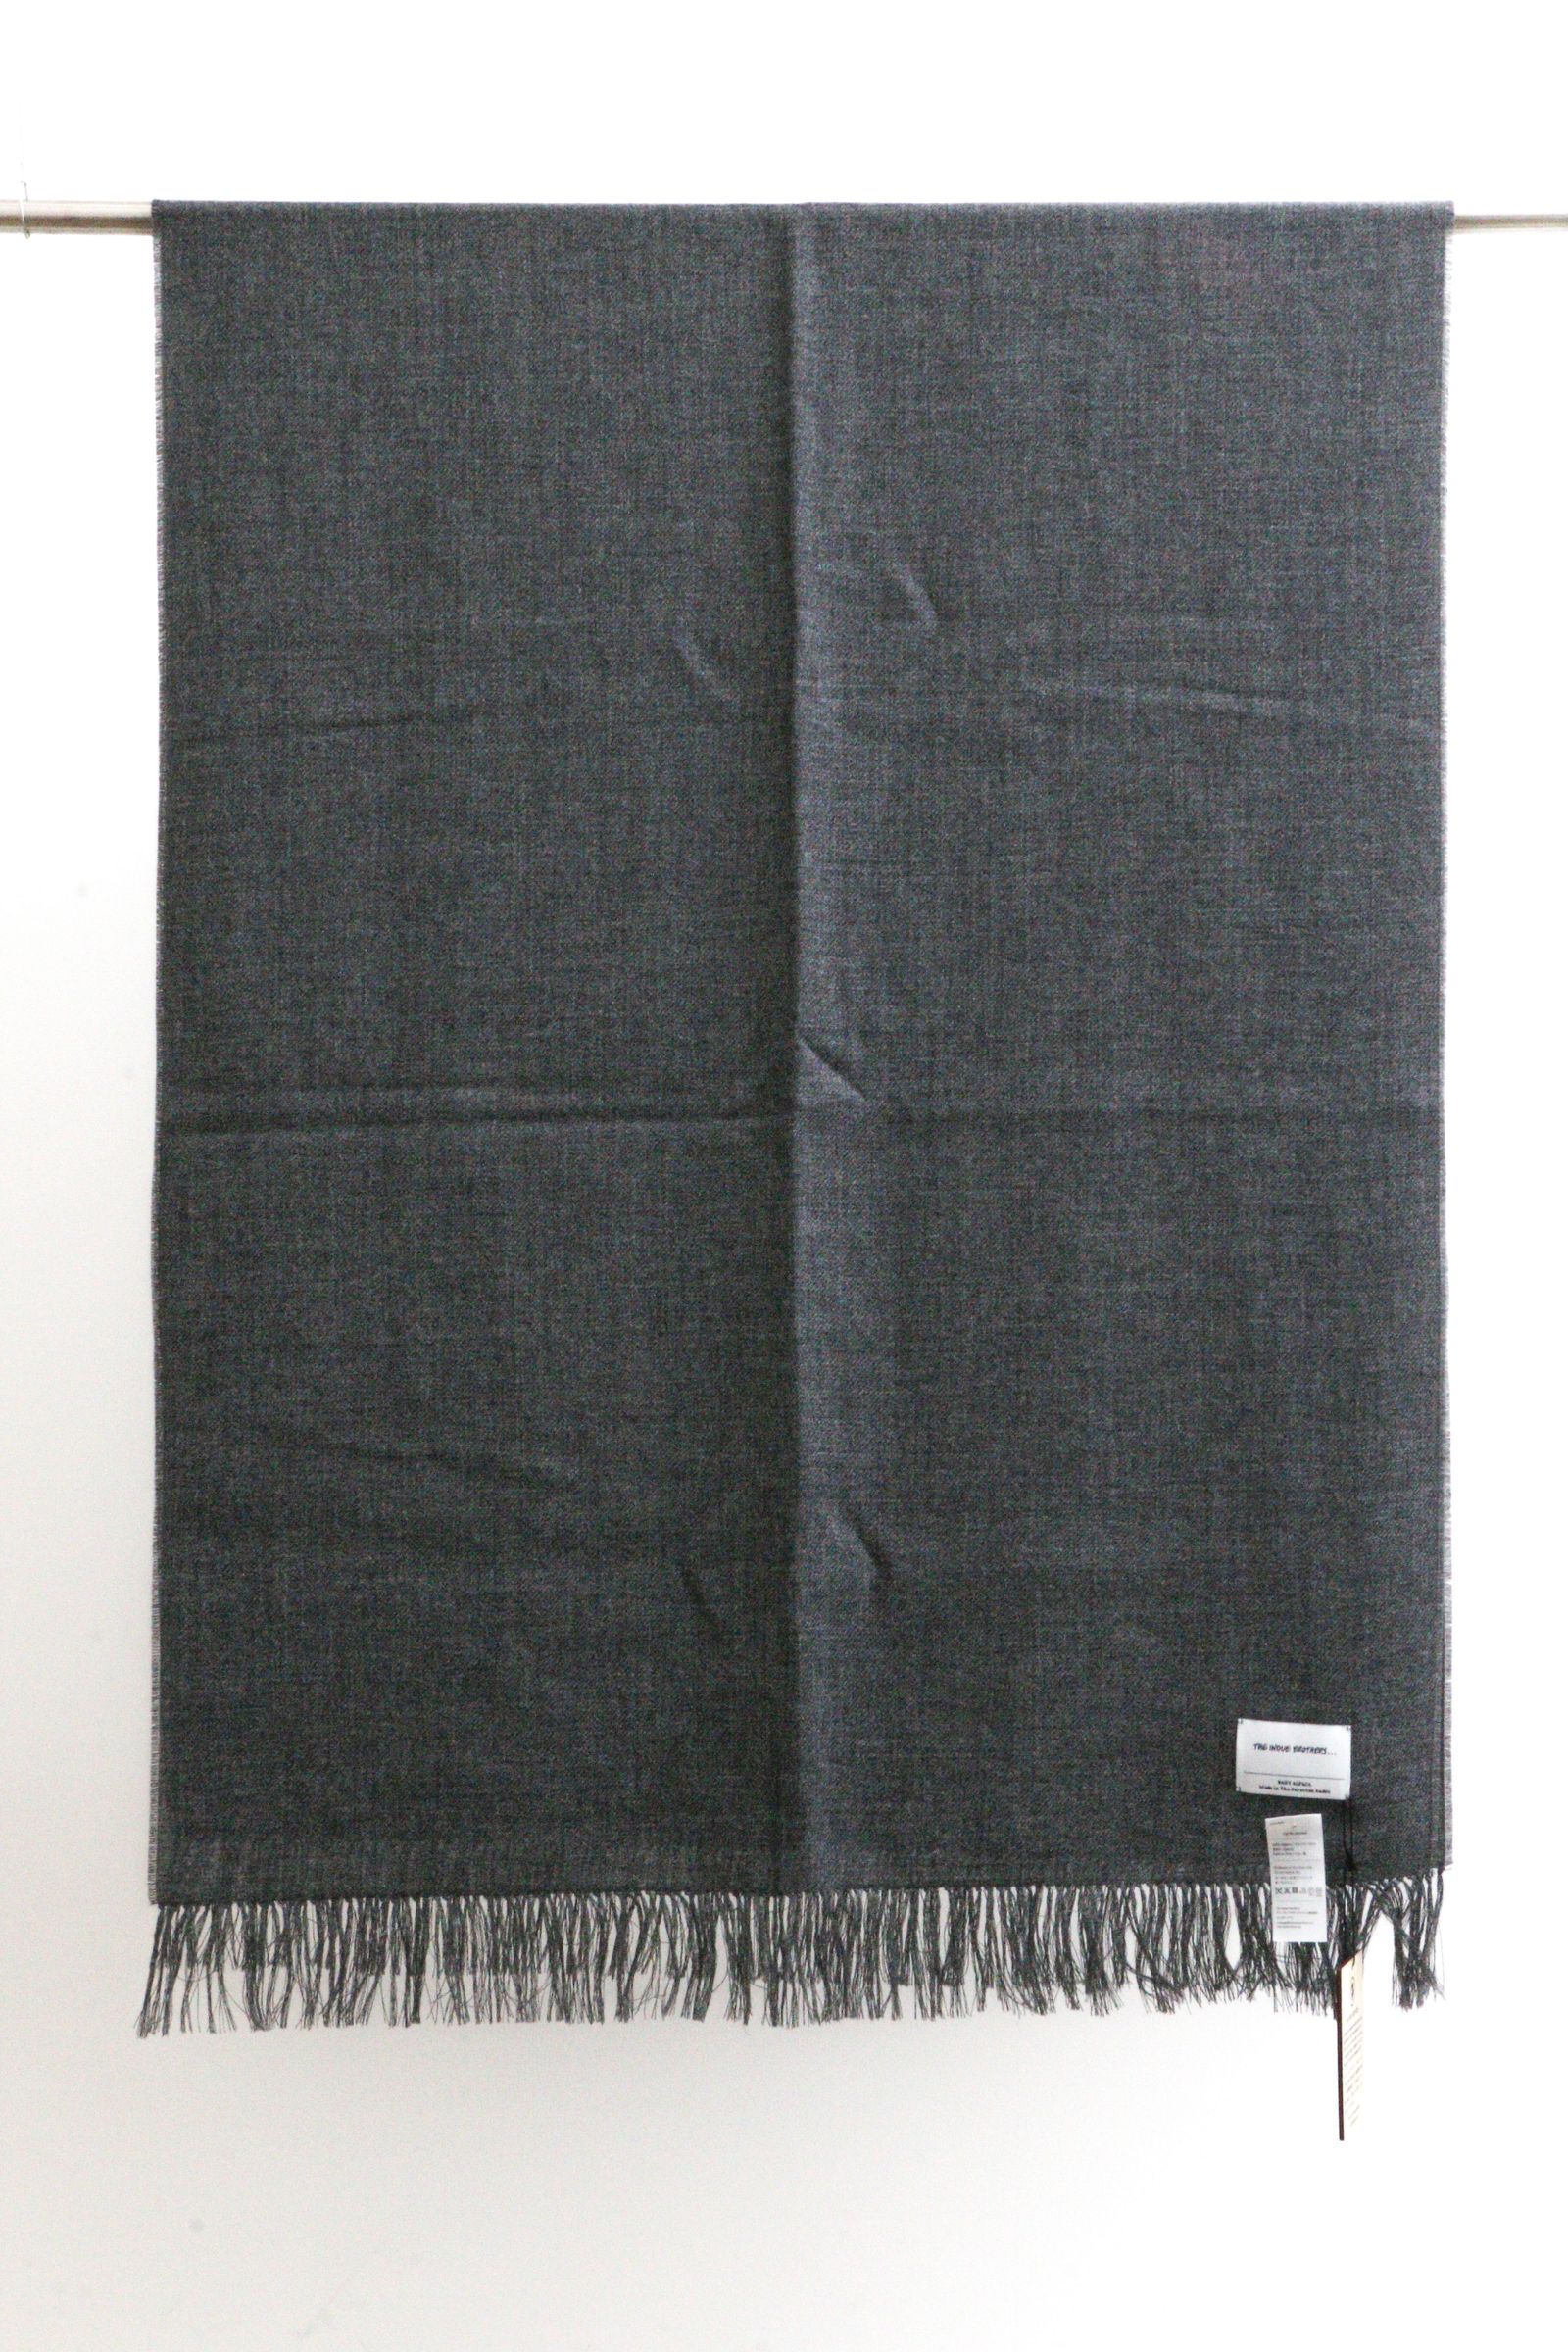 THE INOUE BROTHERS - Non Brushed Large Stole Grey / 大判 